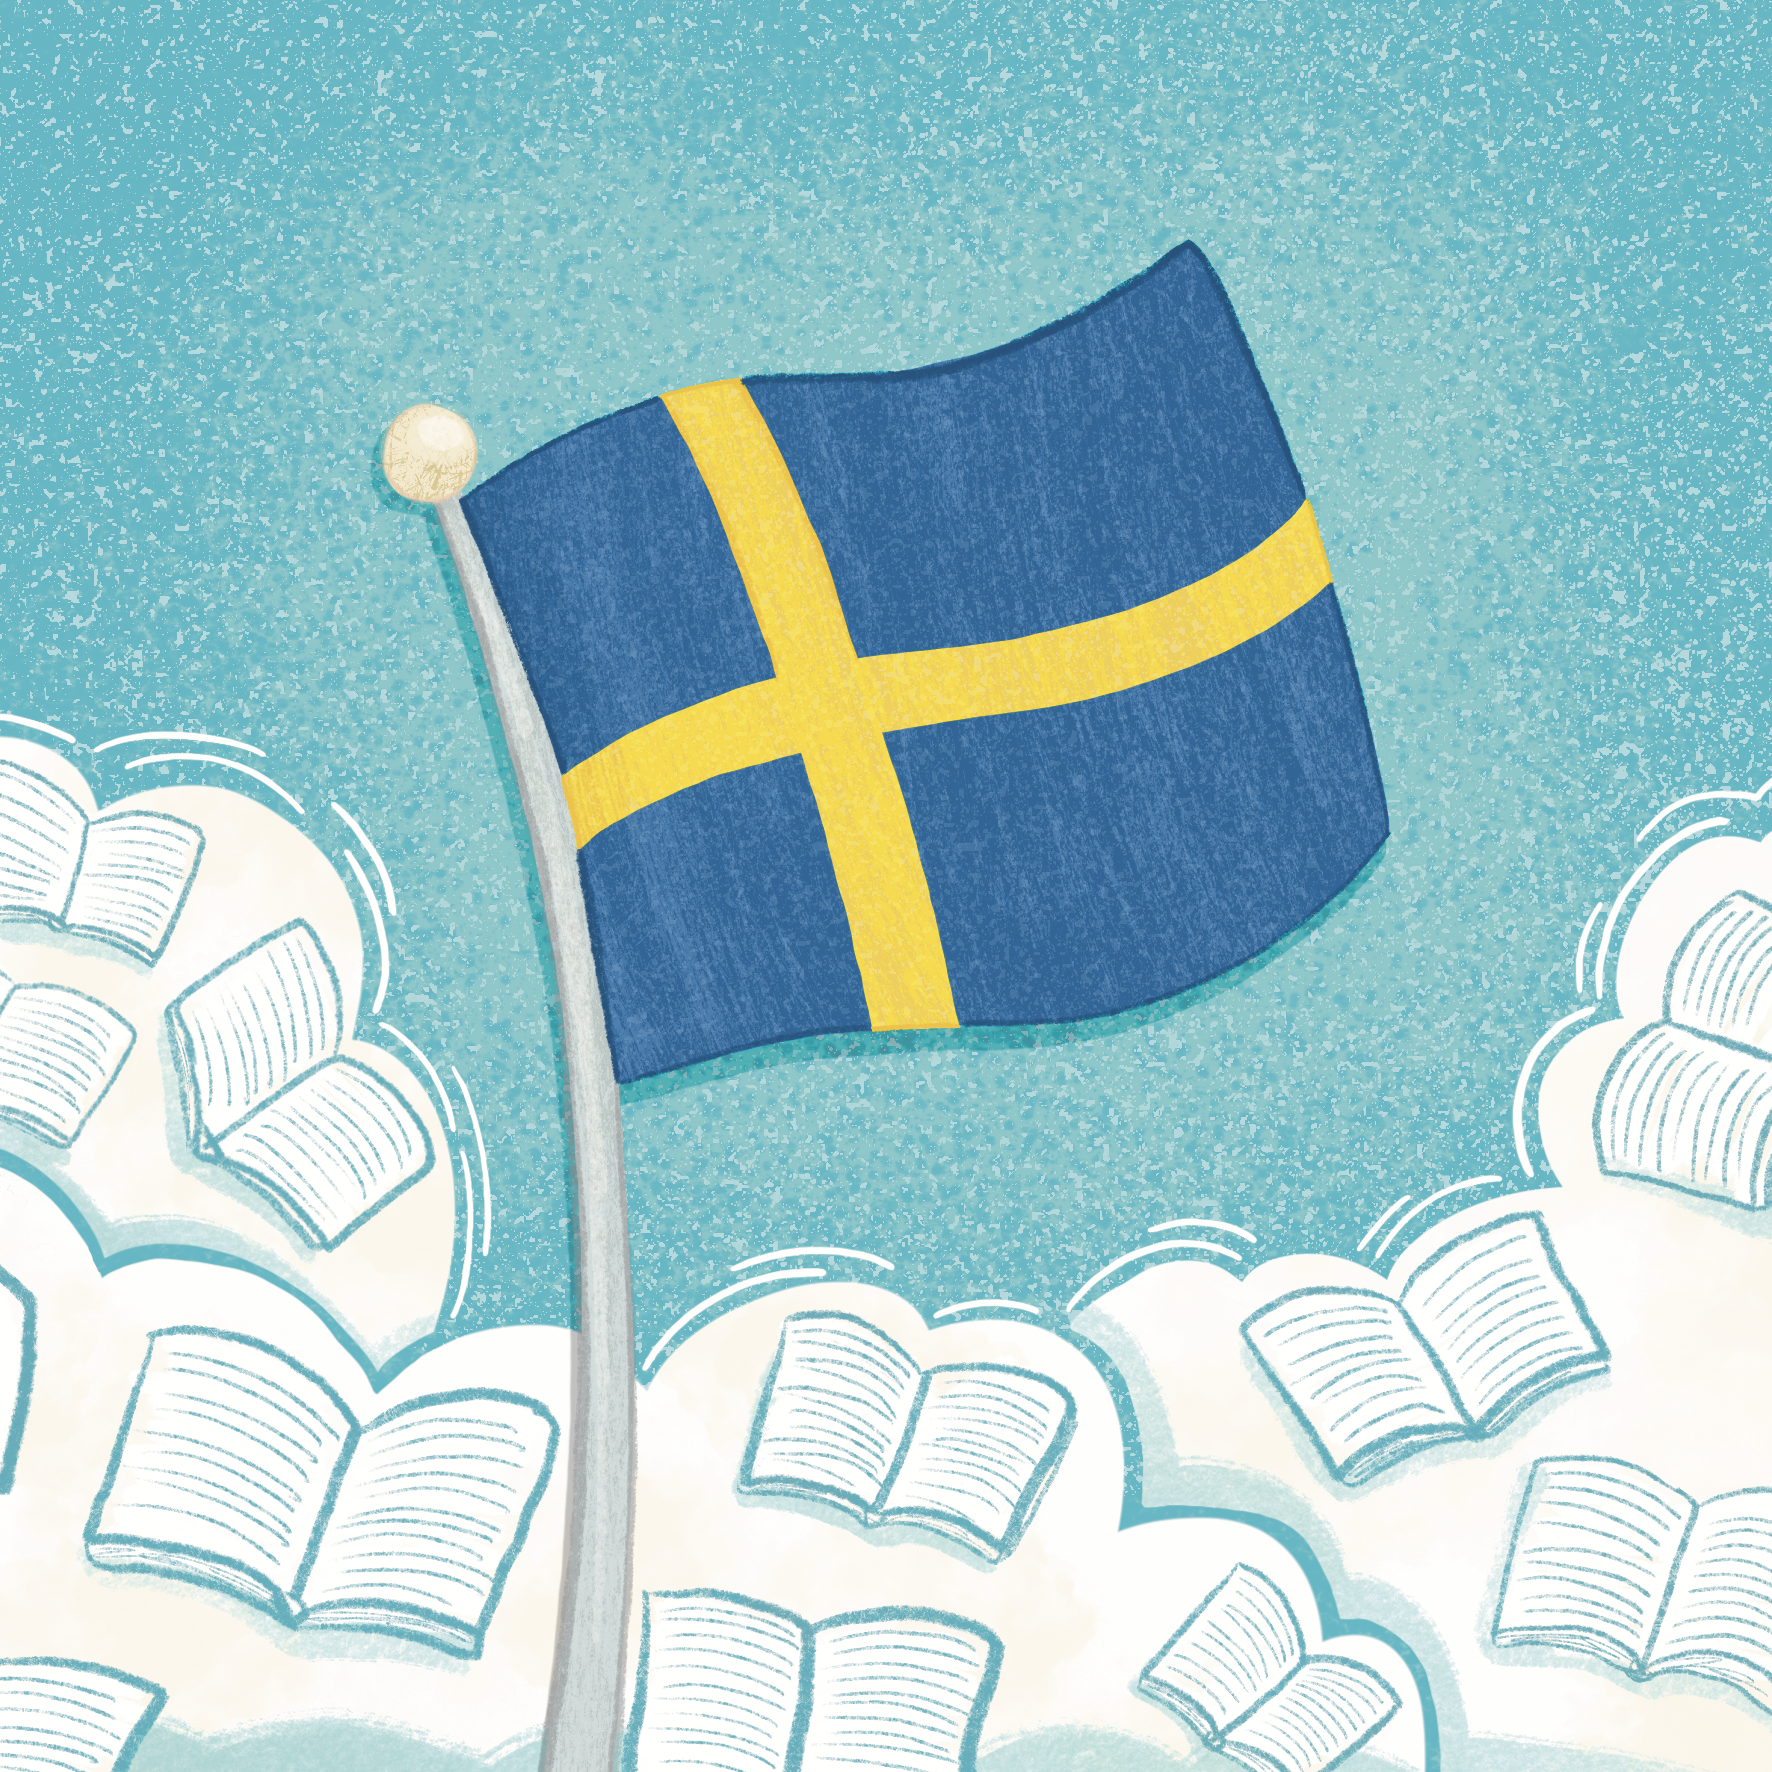 drawing of a Swedish flag surrounded by books